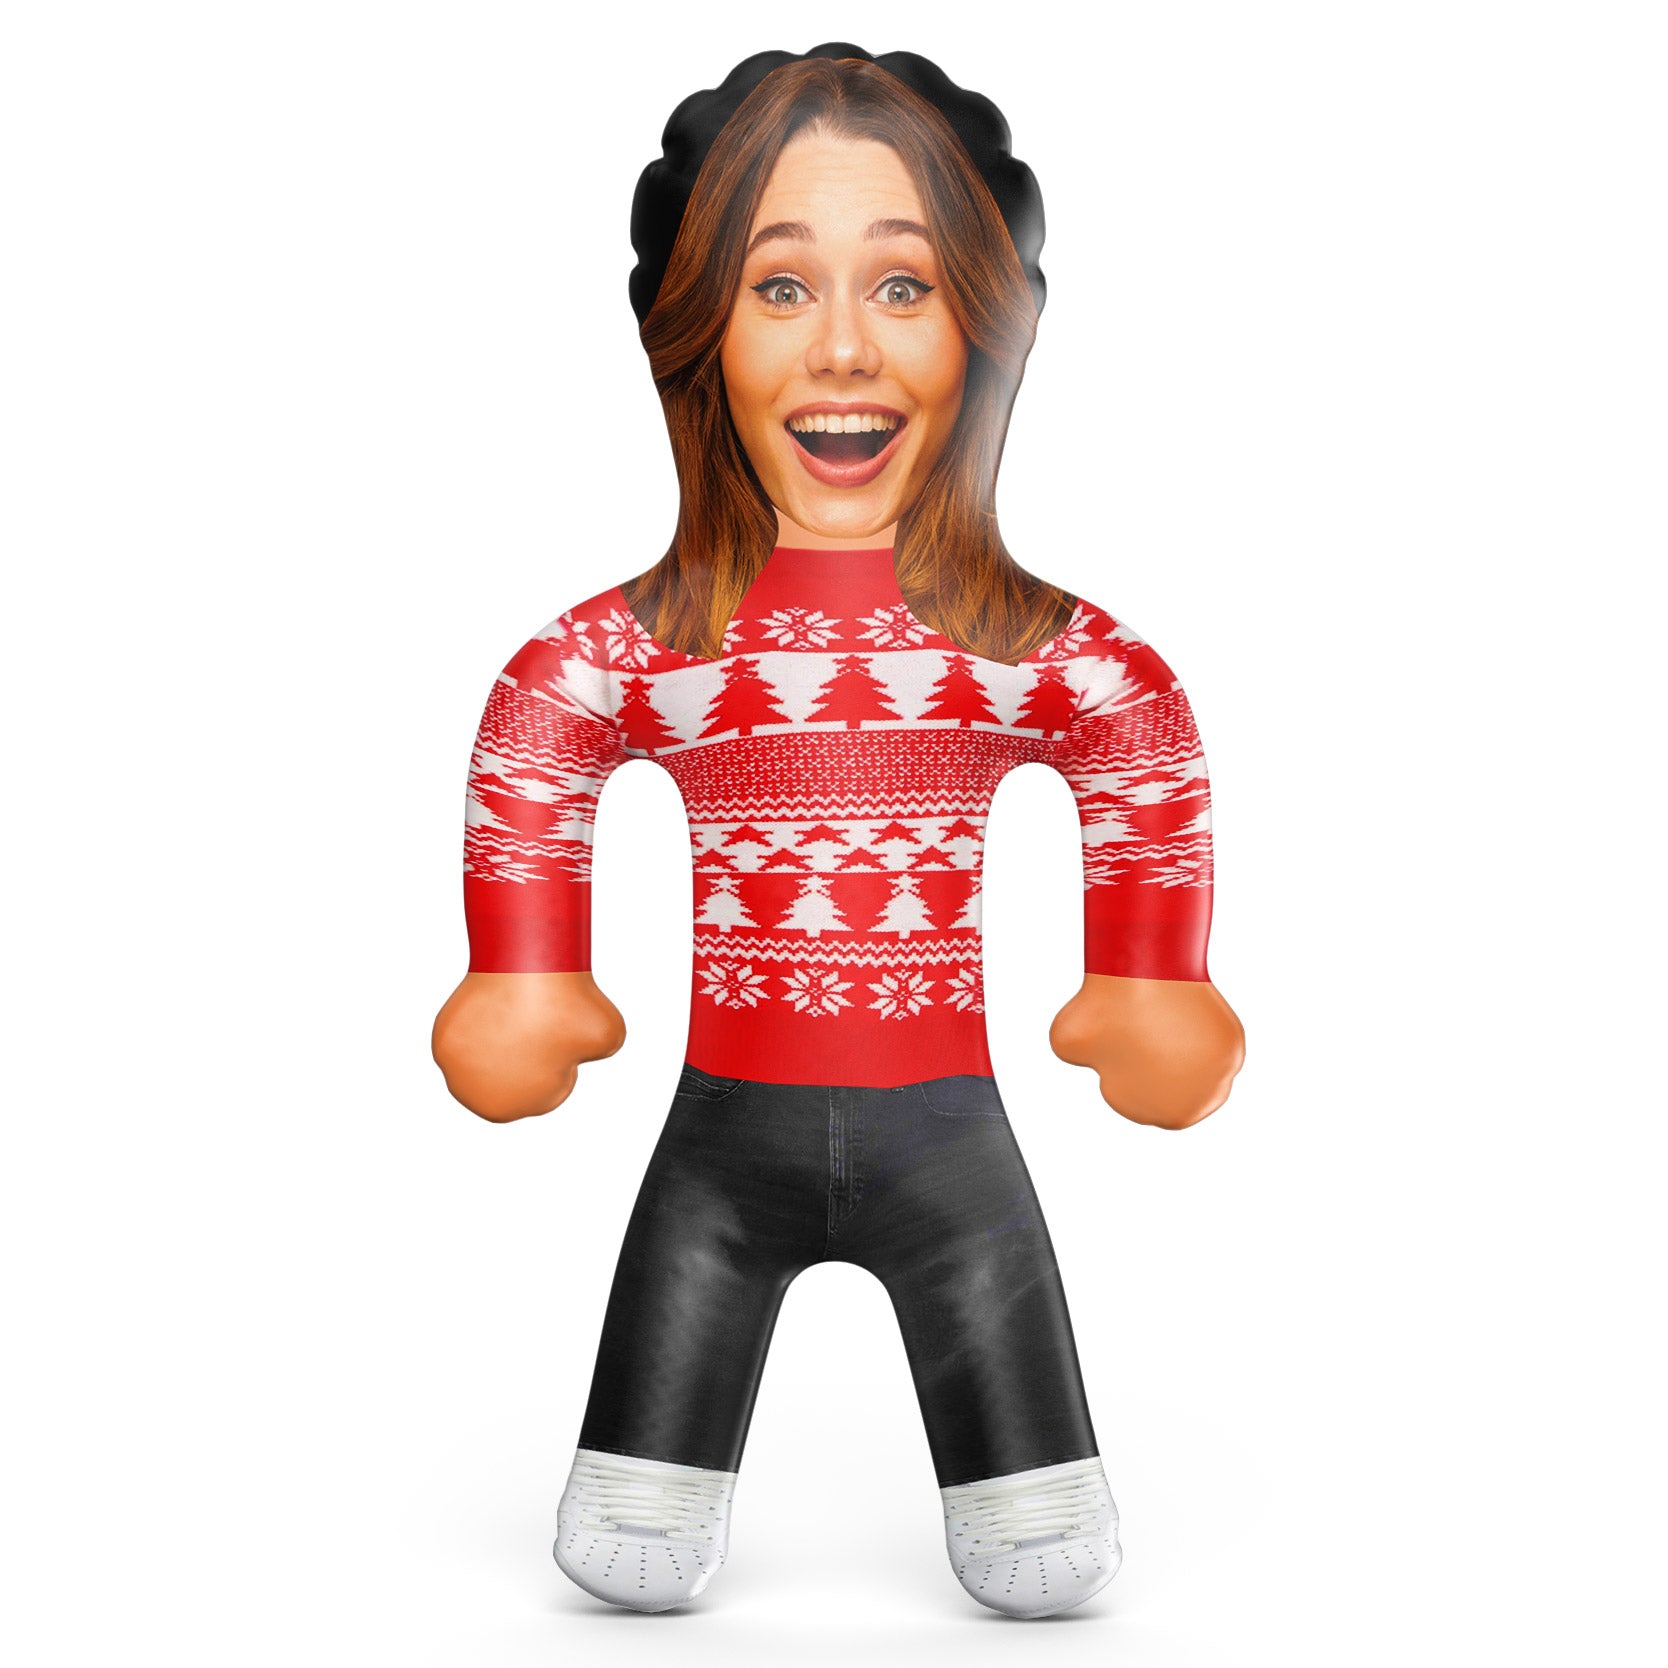 Red Christmas Jumper Inflatable Doll - Xmas Jumper Blow Up Doll